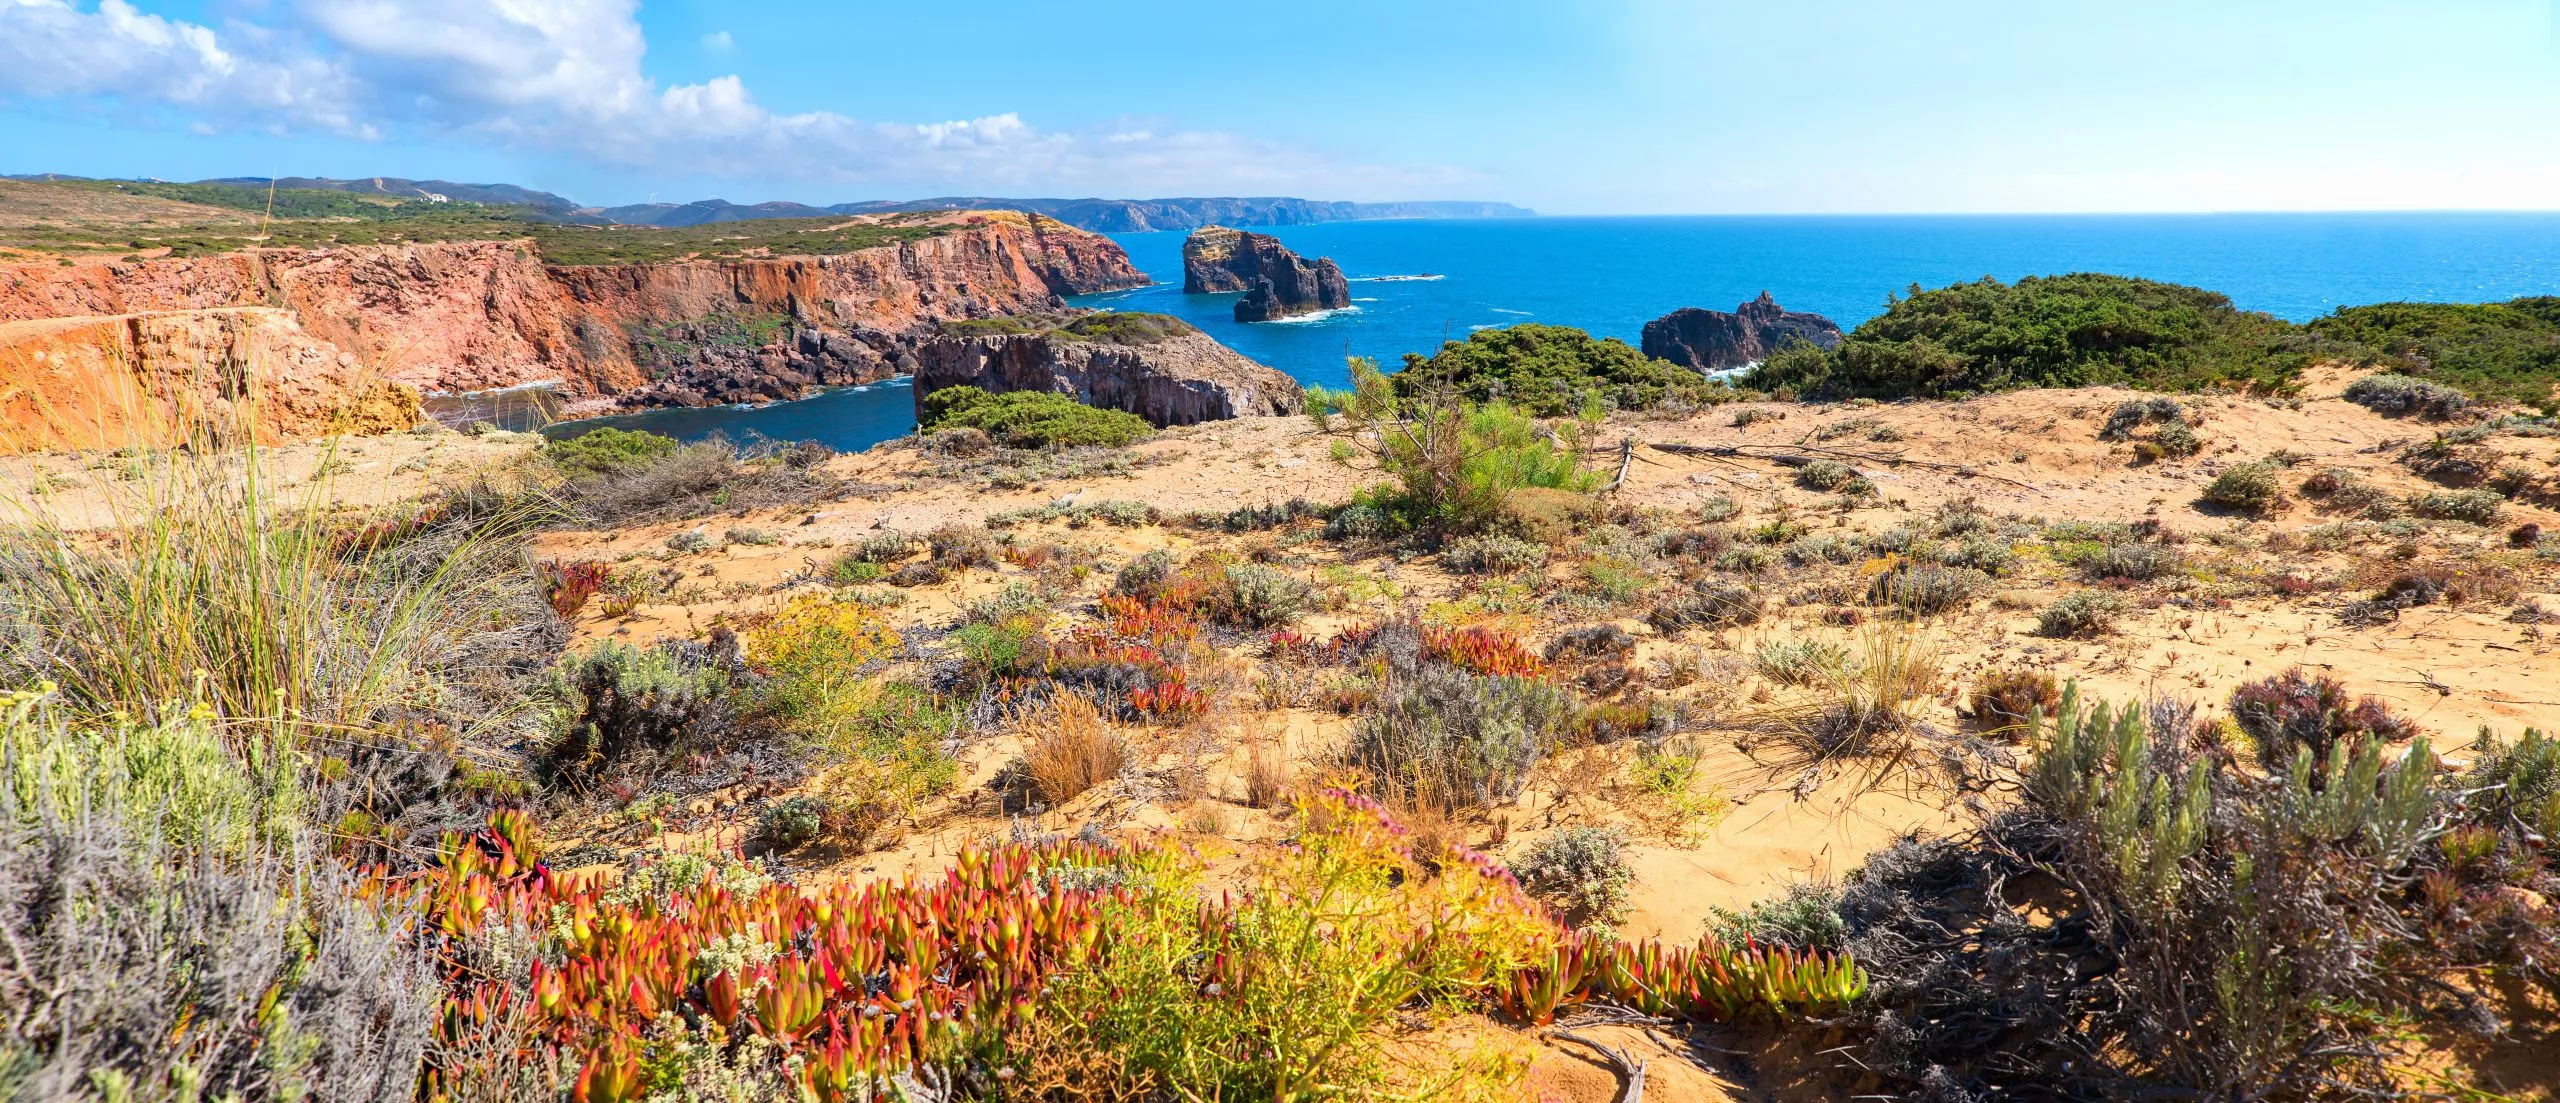 beautiful costa vicentina with colorful vegetation, Carrapateira west algarve